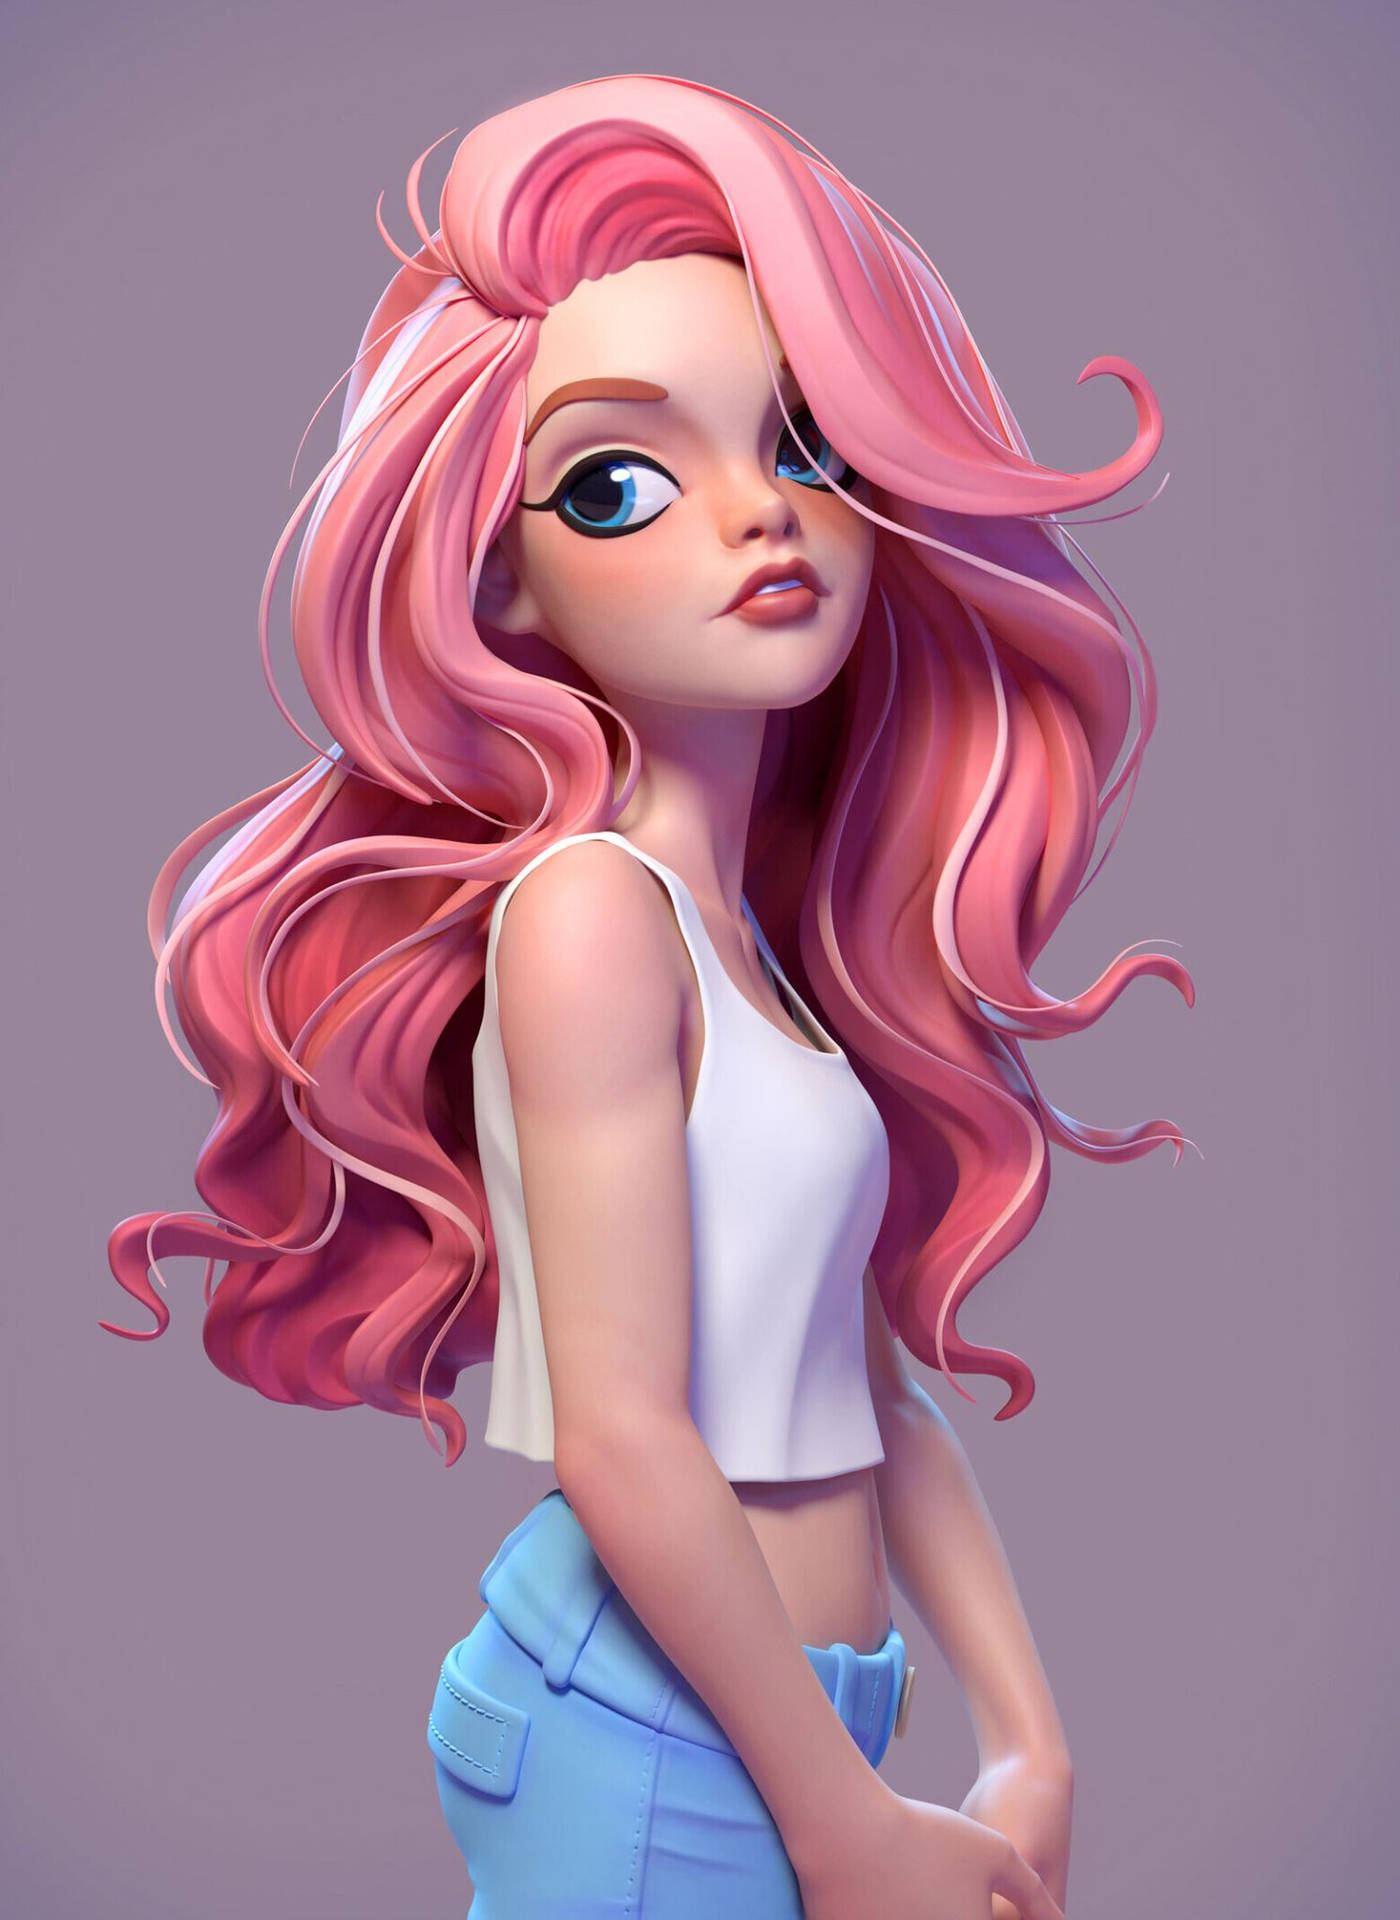 Curly Cool Girl Cartoon In Pink Wallpaper